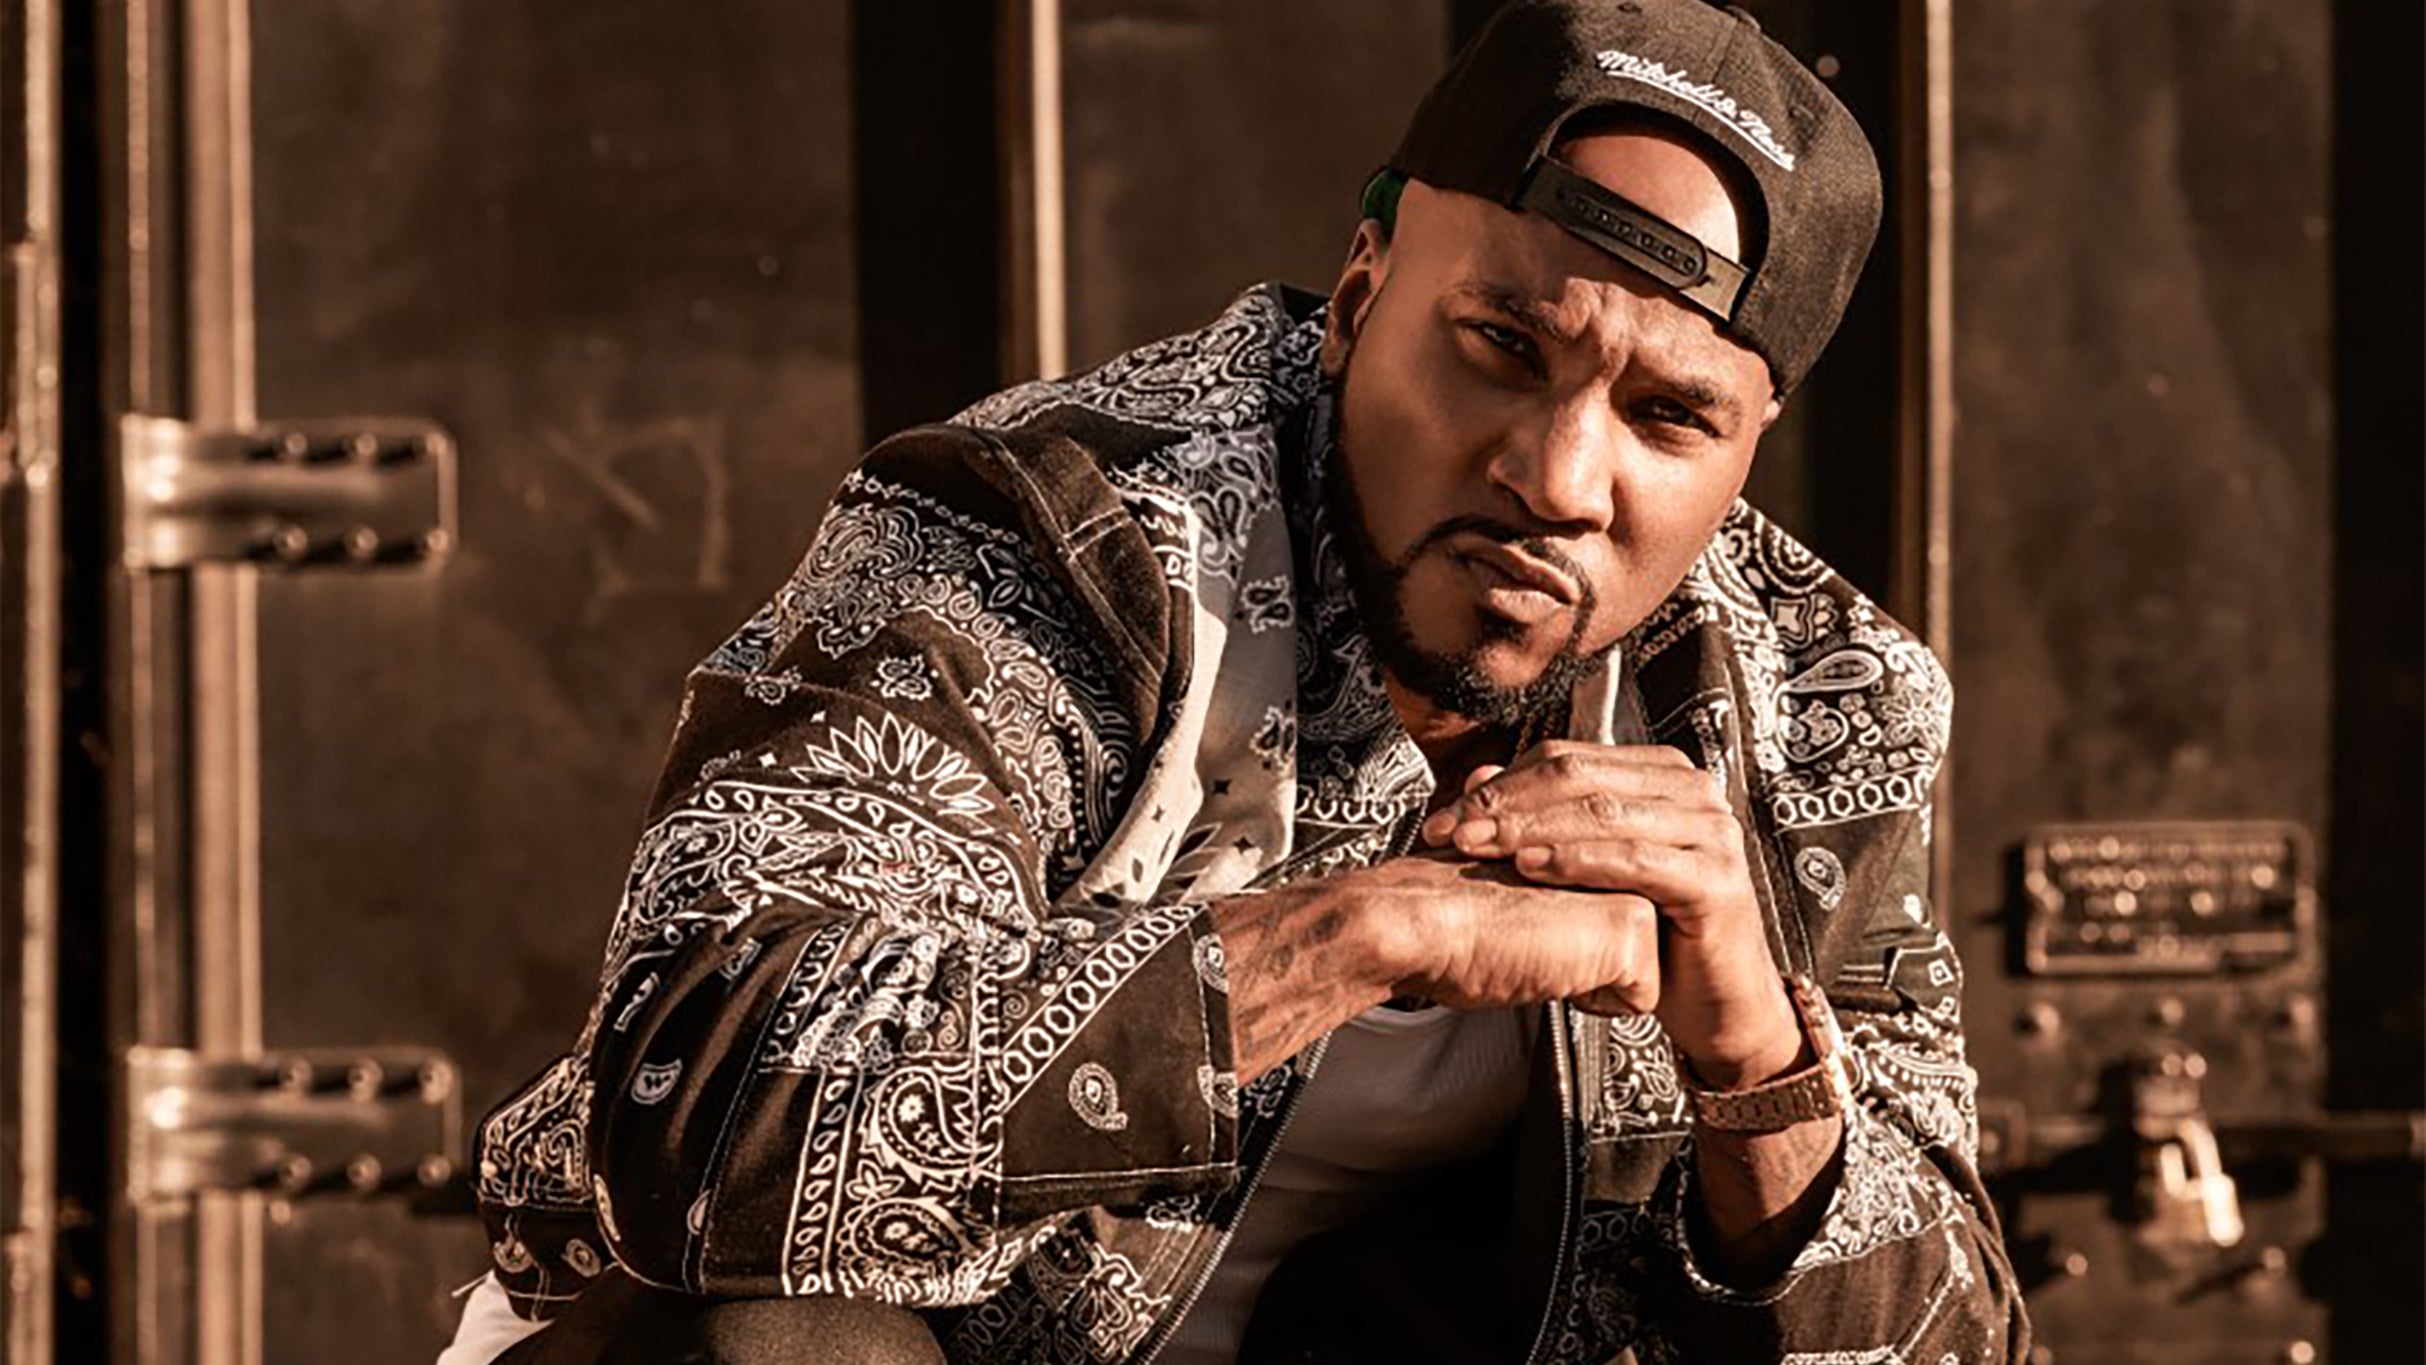 Jeezy: Playlist Concert pre-sale code for legit tickets in Indianapolis